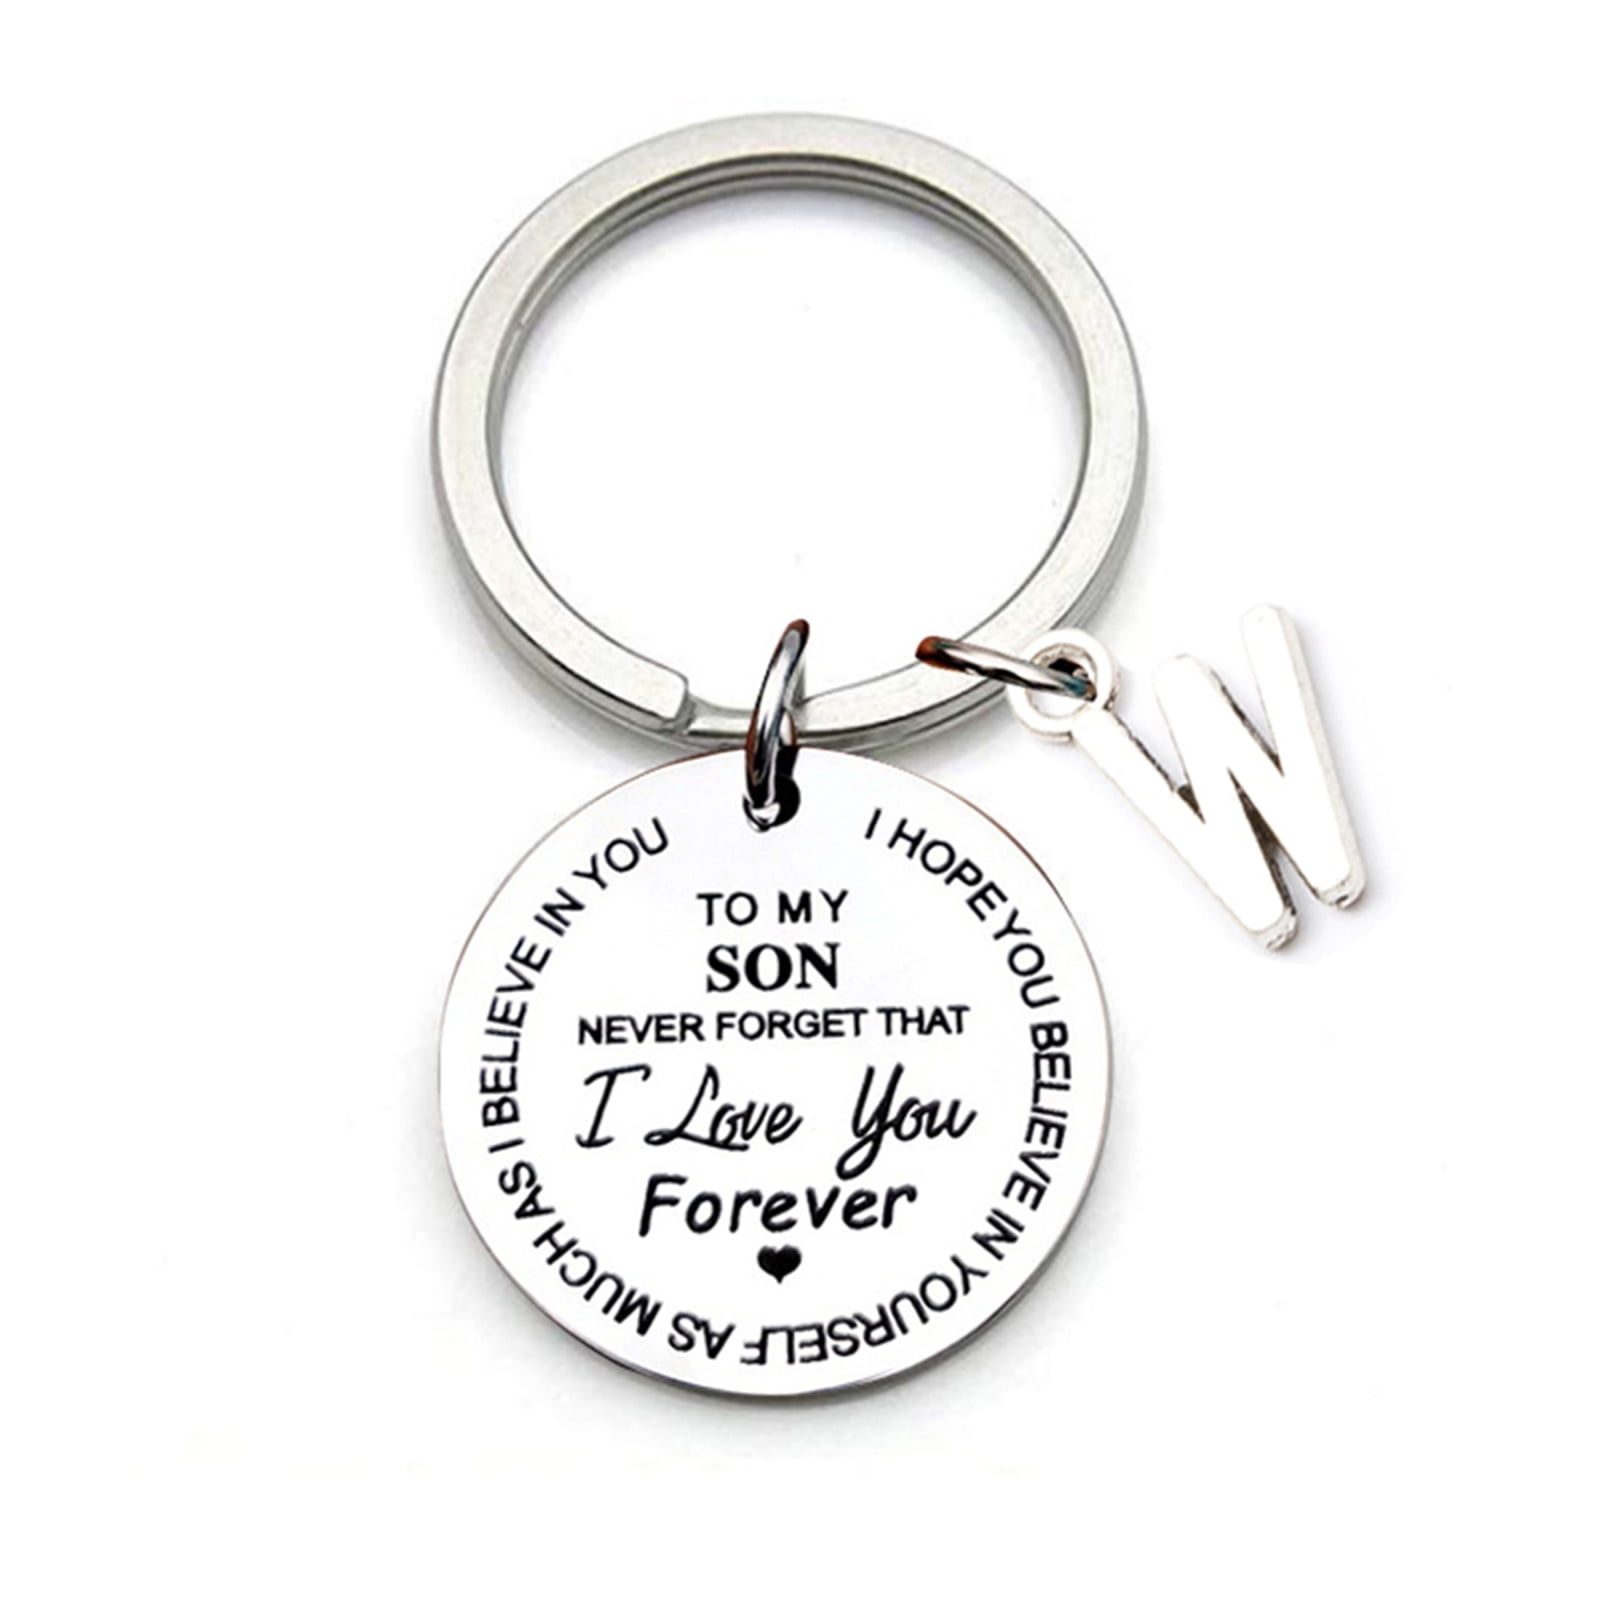 Father gift Keyring Genuine Solid 925 sterling silver KEY RING- Split ring 